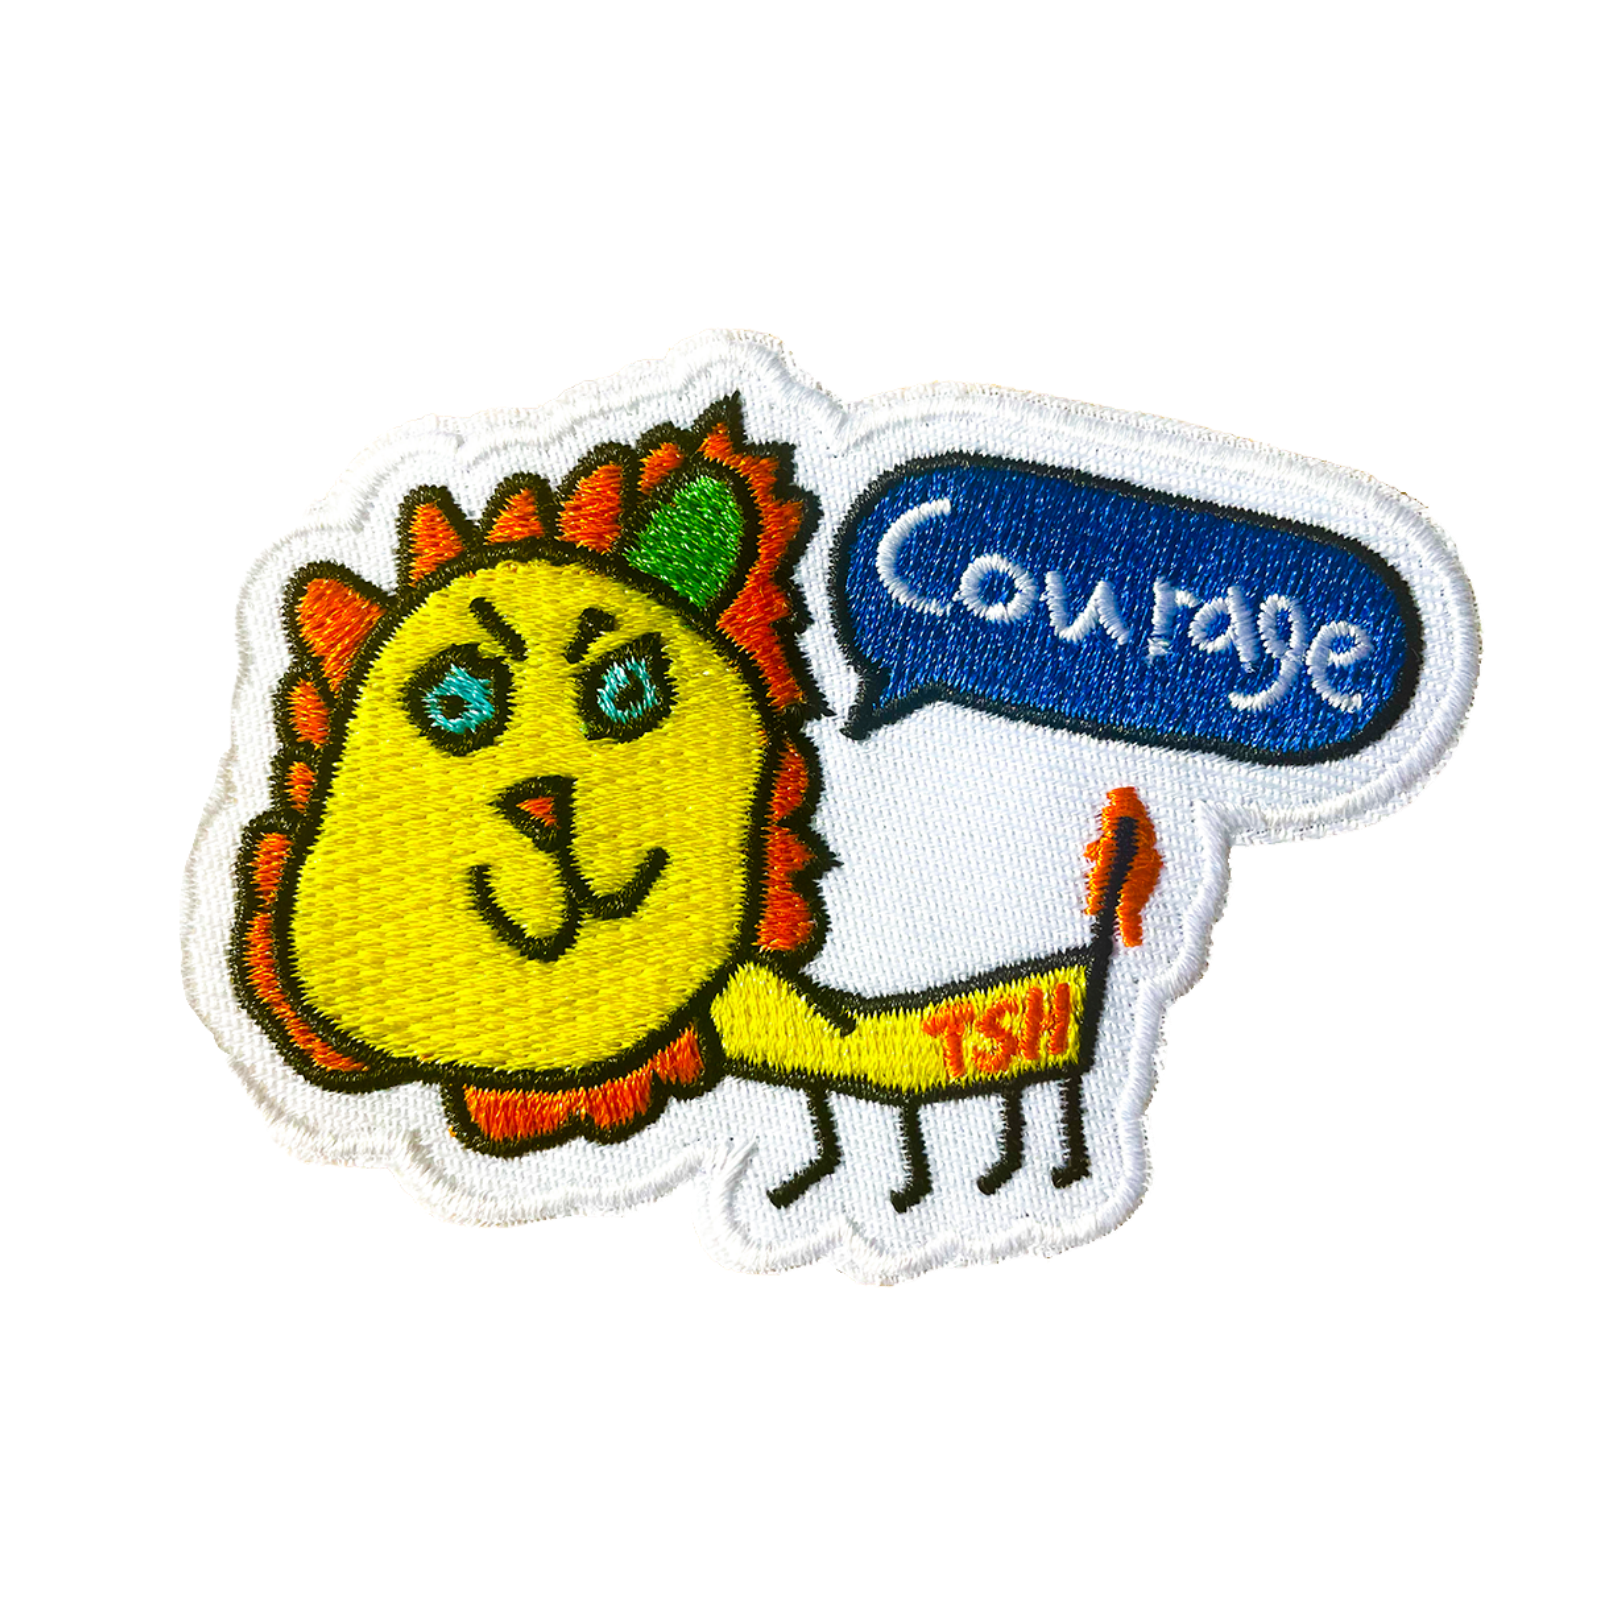 Courage Mission (October 2021) - TinySuperheroes